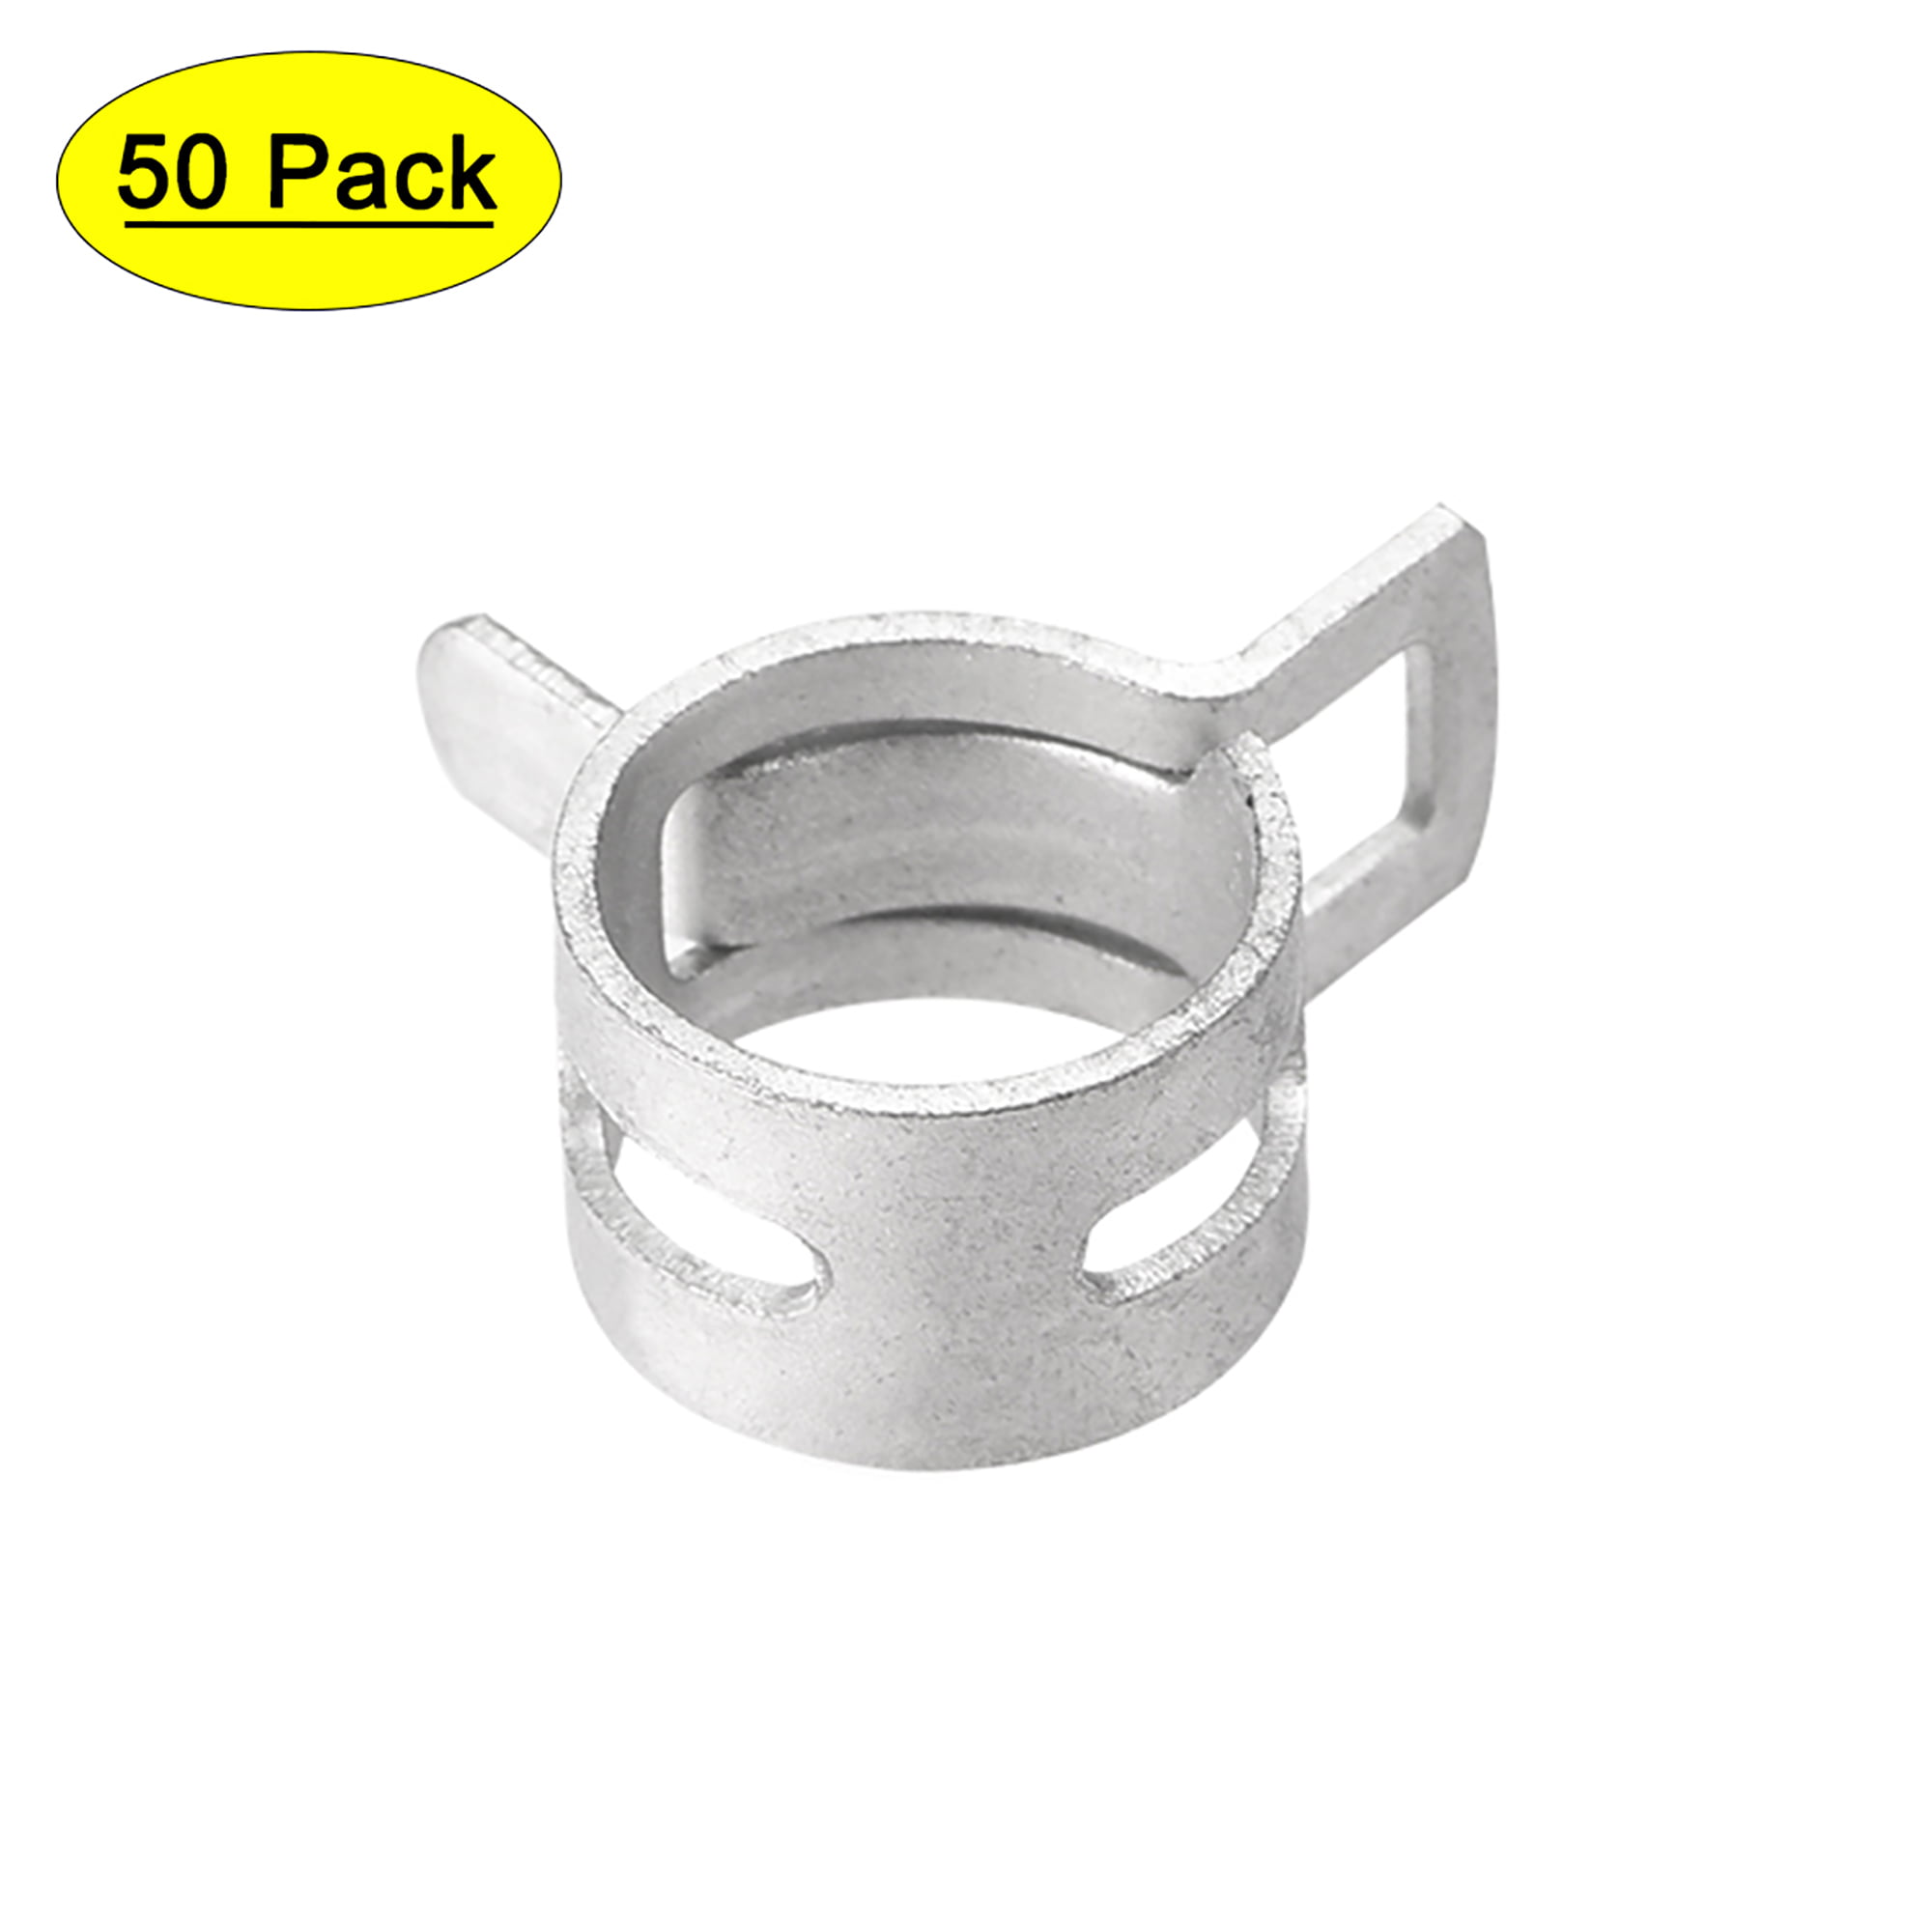 11mm OD Metal SPRING BAND CLIP Silicone Rubber Hose Clamp Fuel Pipe Oil clips  4 